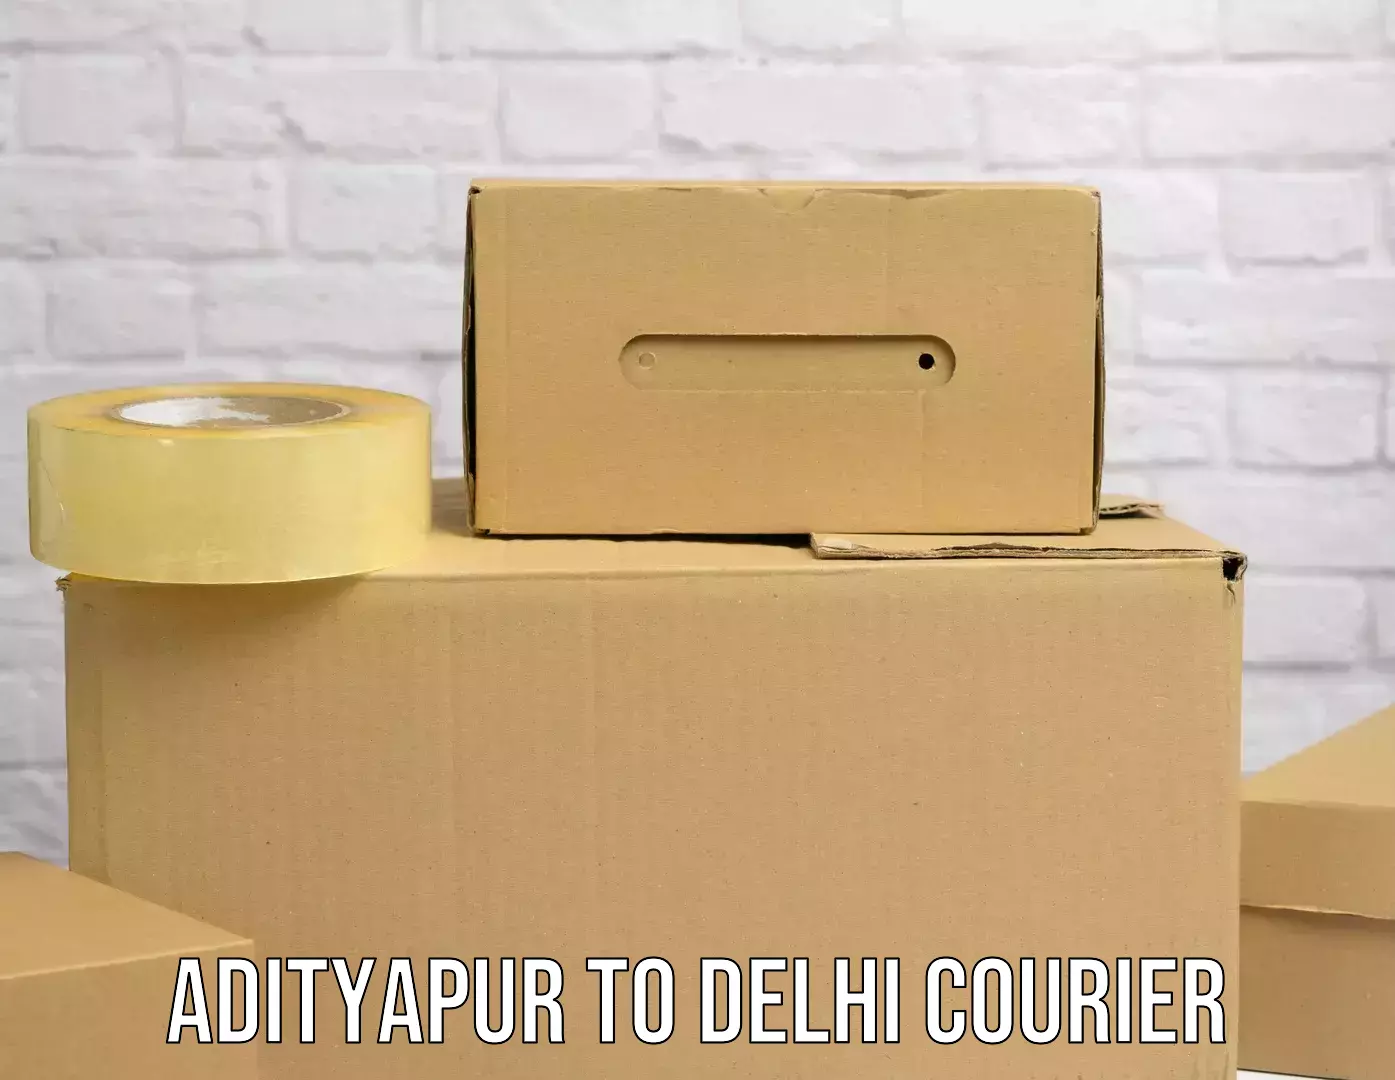 State-of-the-art courier technology Adityapur to Burari